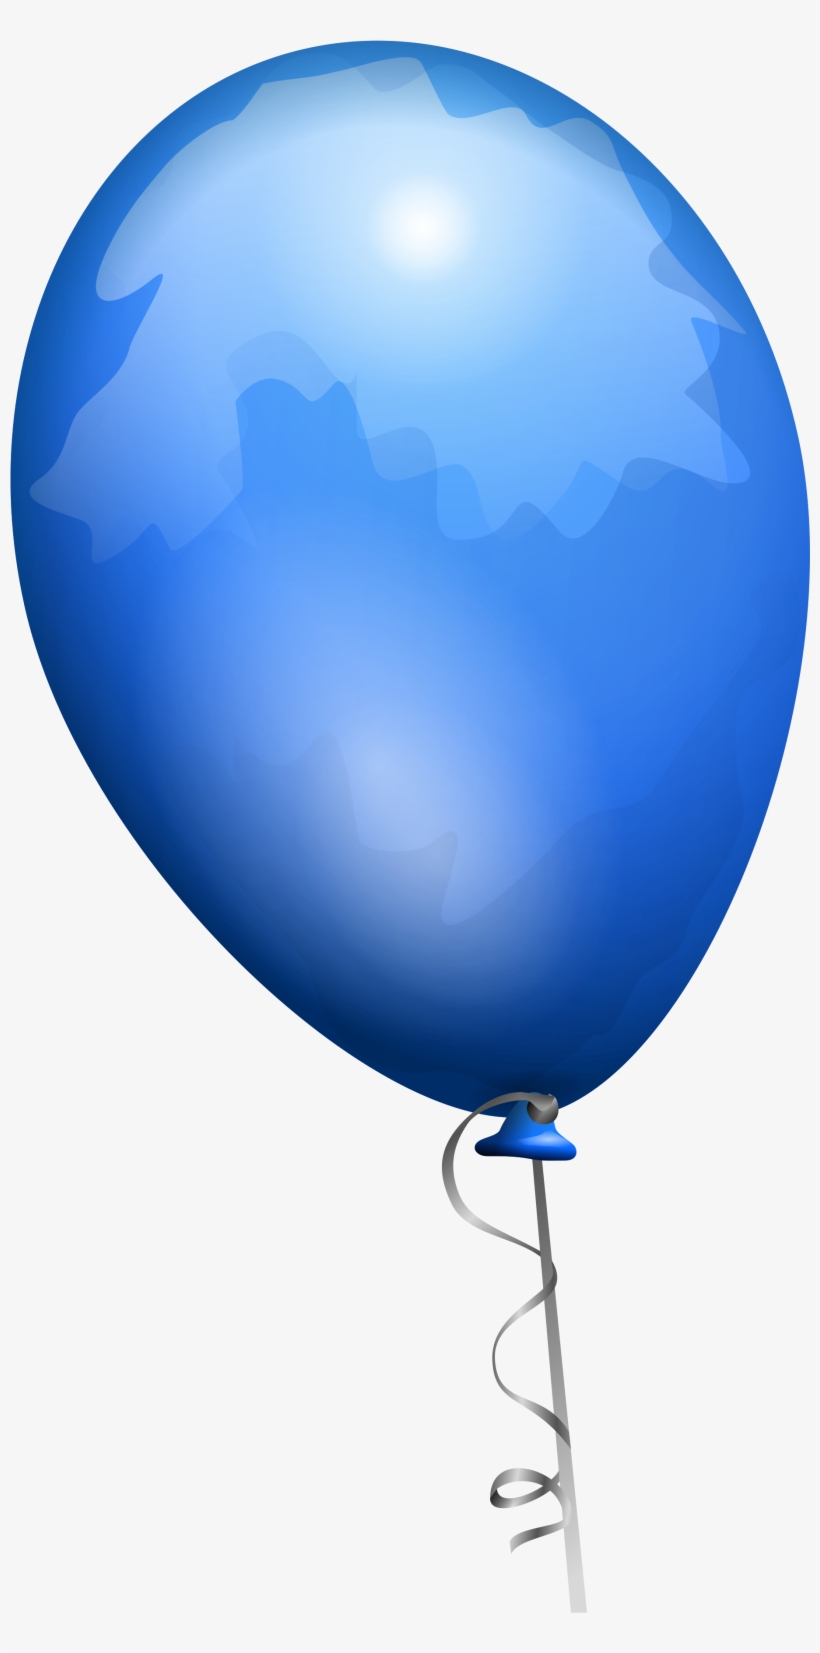 Blue Balloon's Png Image - Balloon Clip Art, transparent png #55853